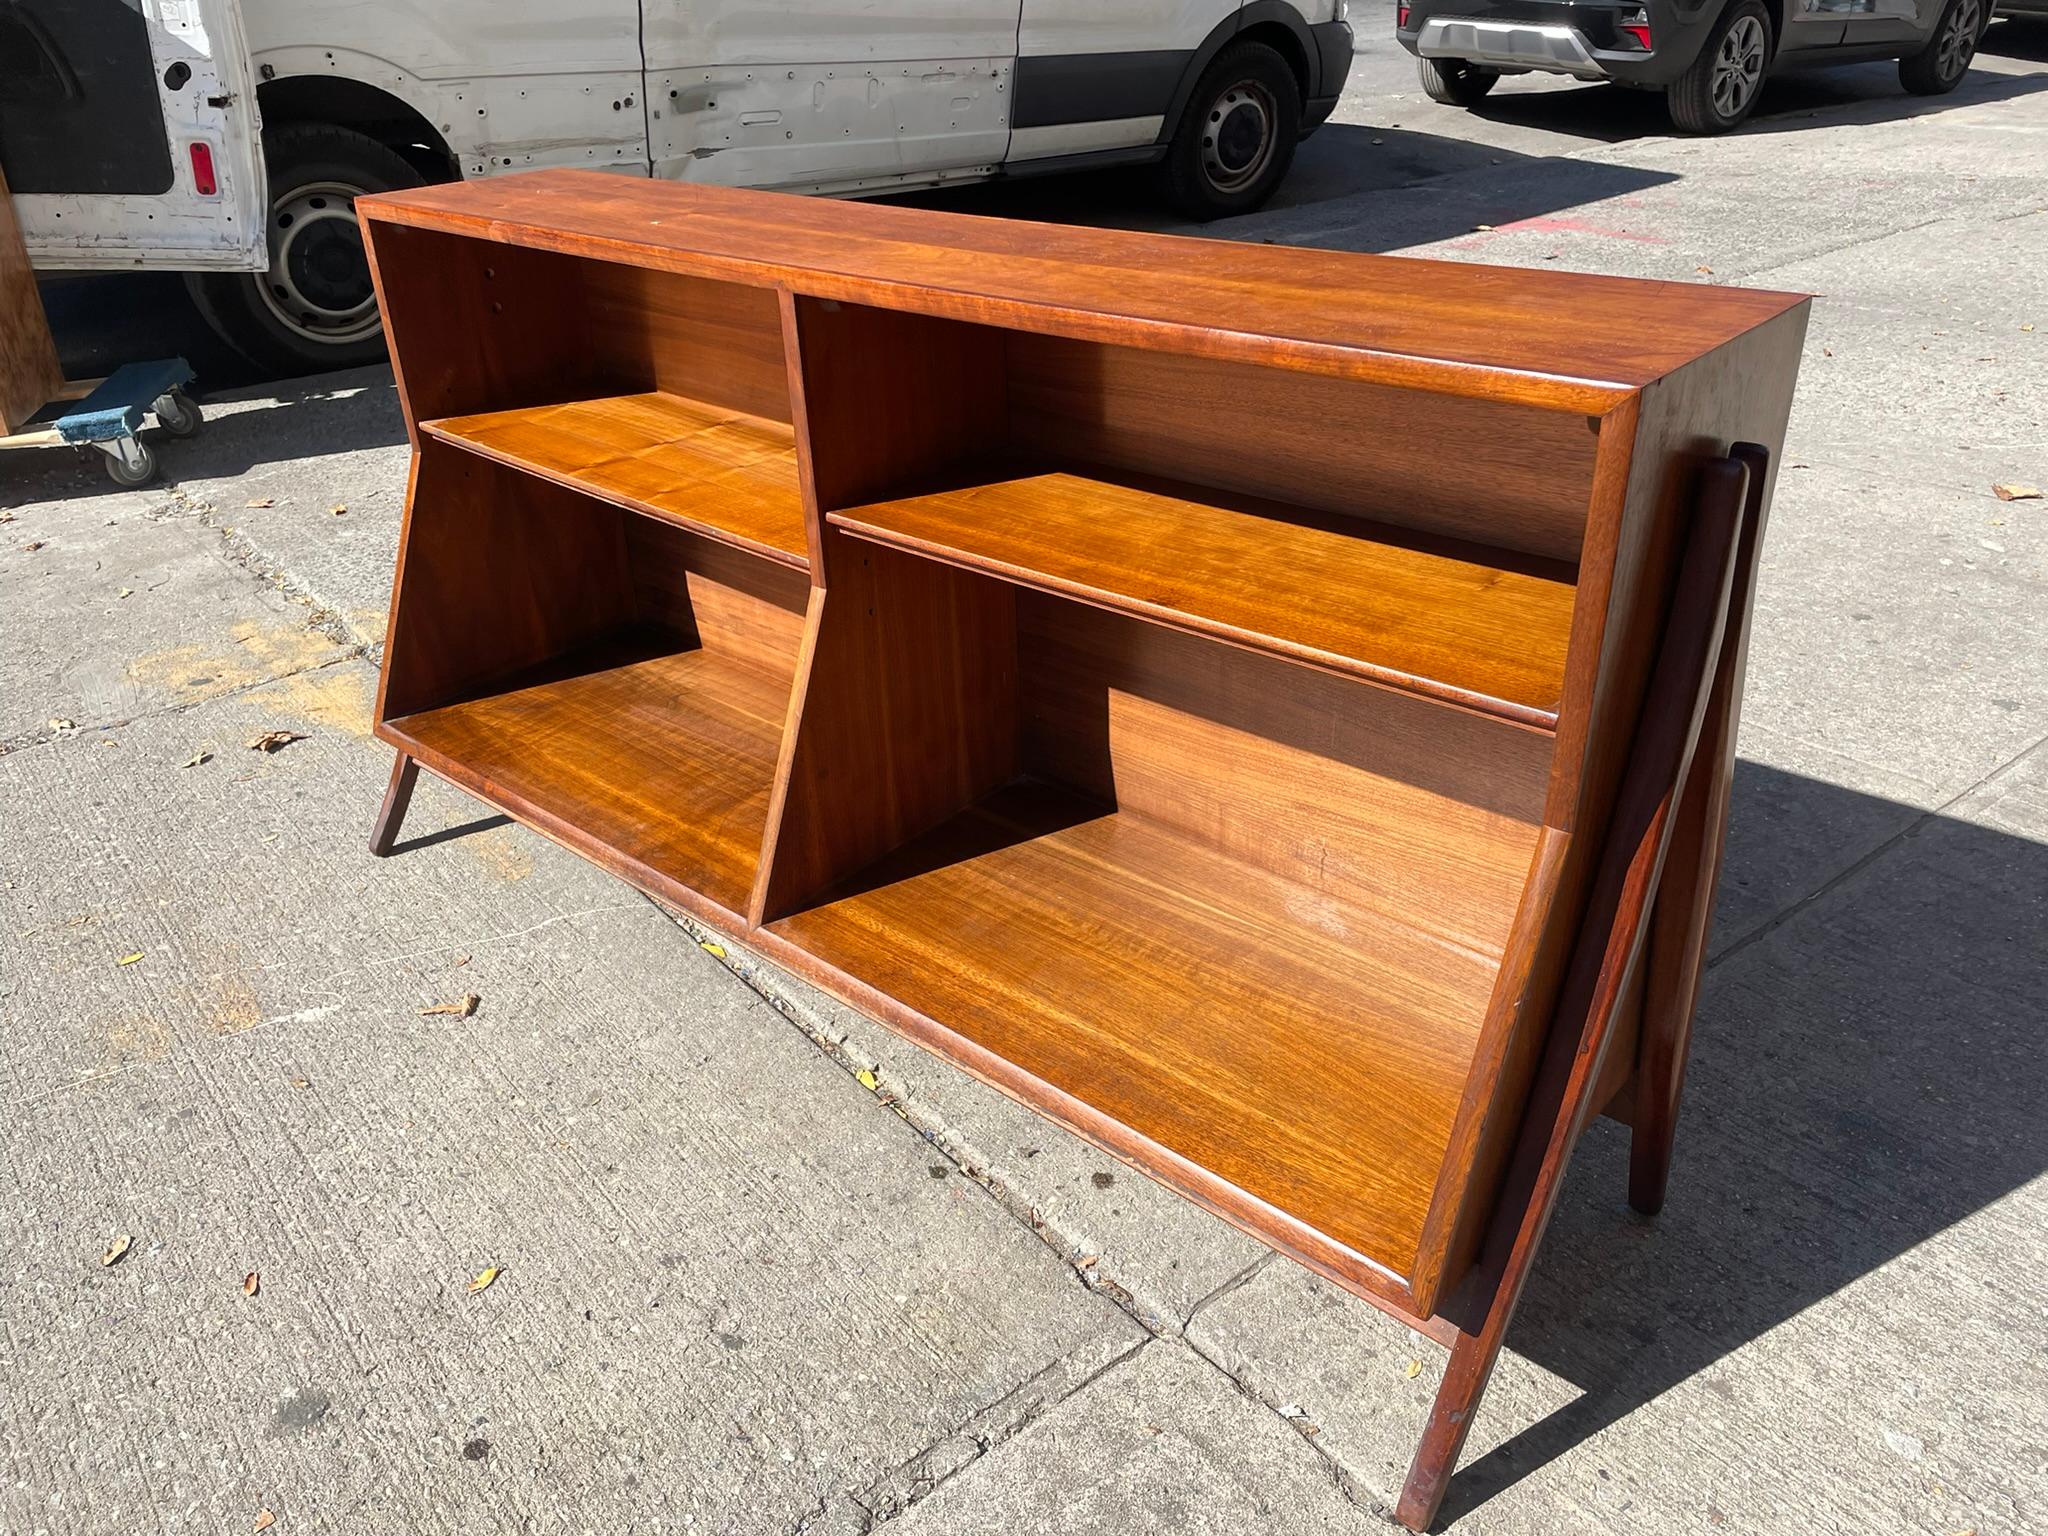 This fantastic credenza can be used as a TV stand, record cabinet, bookshelf or bar. Plenty of storage for records with adjustable wood shelves.
This unit has a Danish modern look with gorgeous flared legs and is constructed with solid wood legs